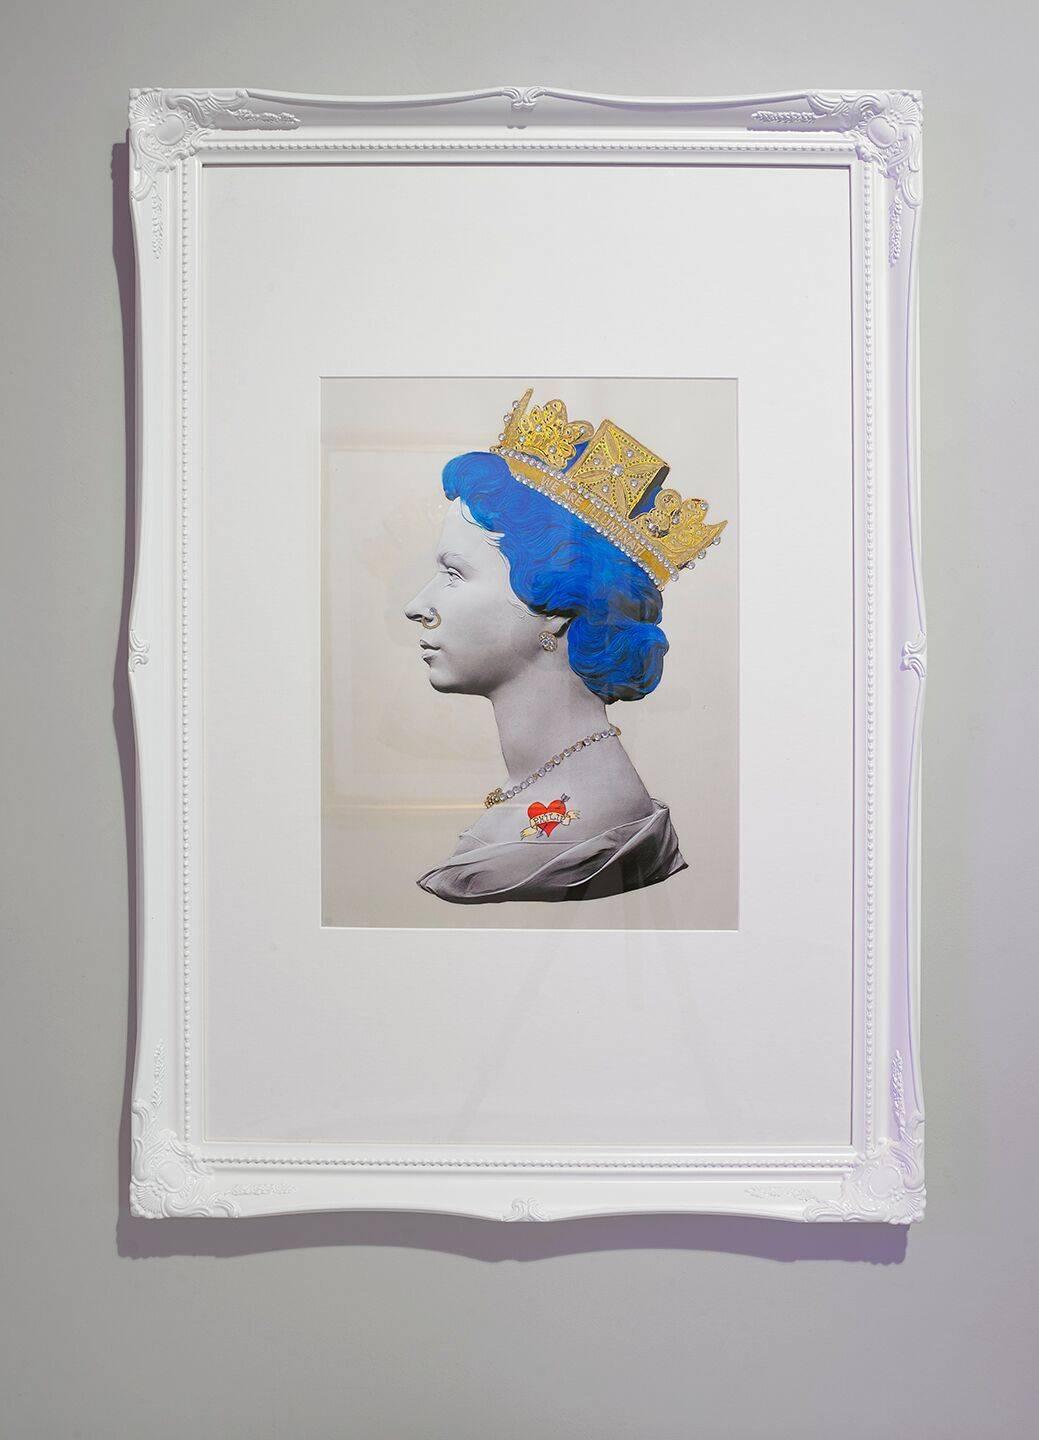 Small Baby Blue Queen Print Philip Tattoo Heart Gold Crown Limited Ed Print - Mixed Media Art by Mark Sloper